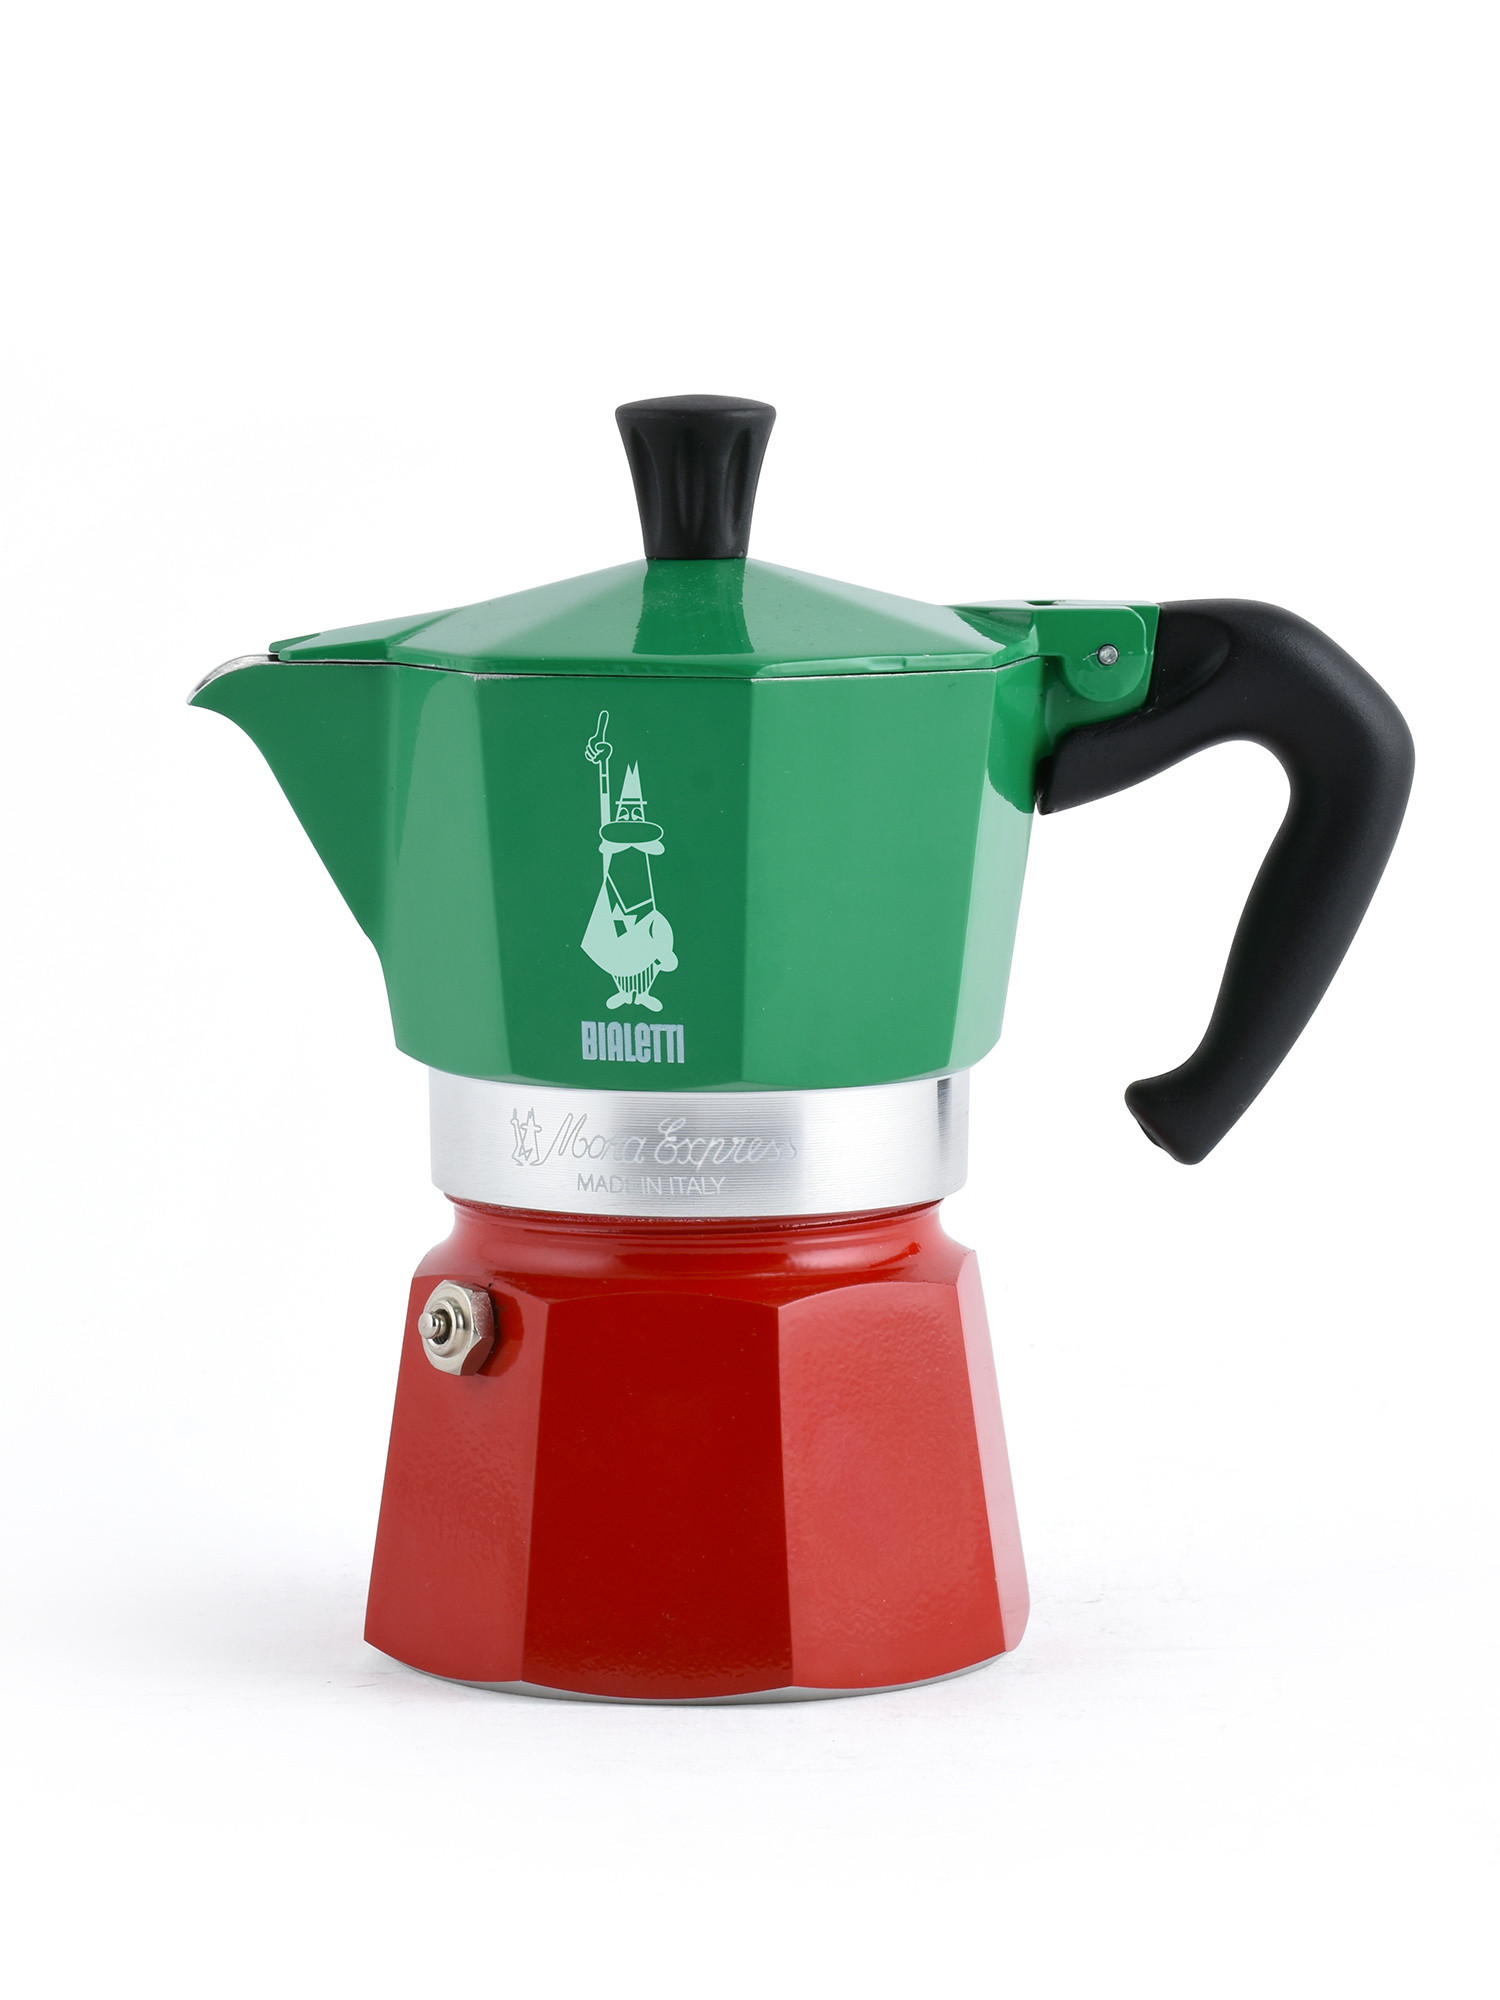 Bialetti - Moka Express Tricolore 3 tazze, Multicolor, large image number 0